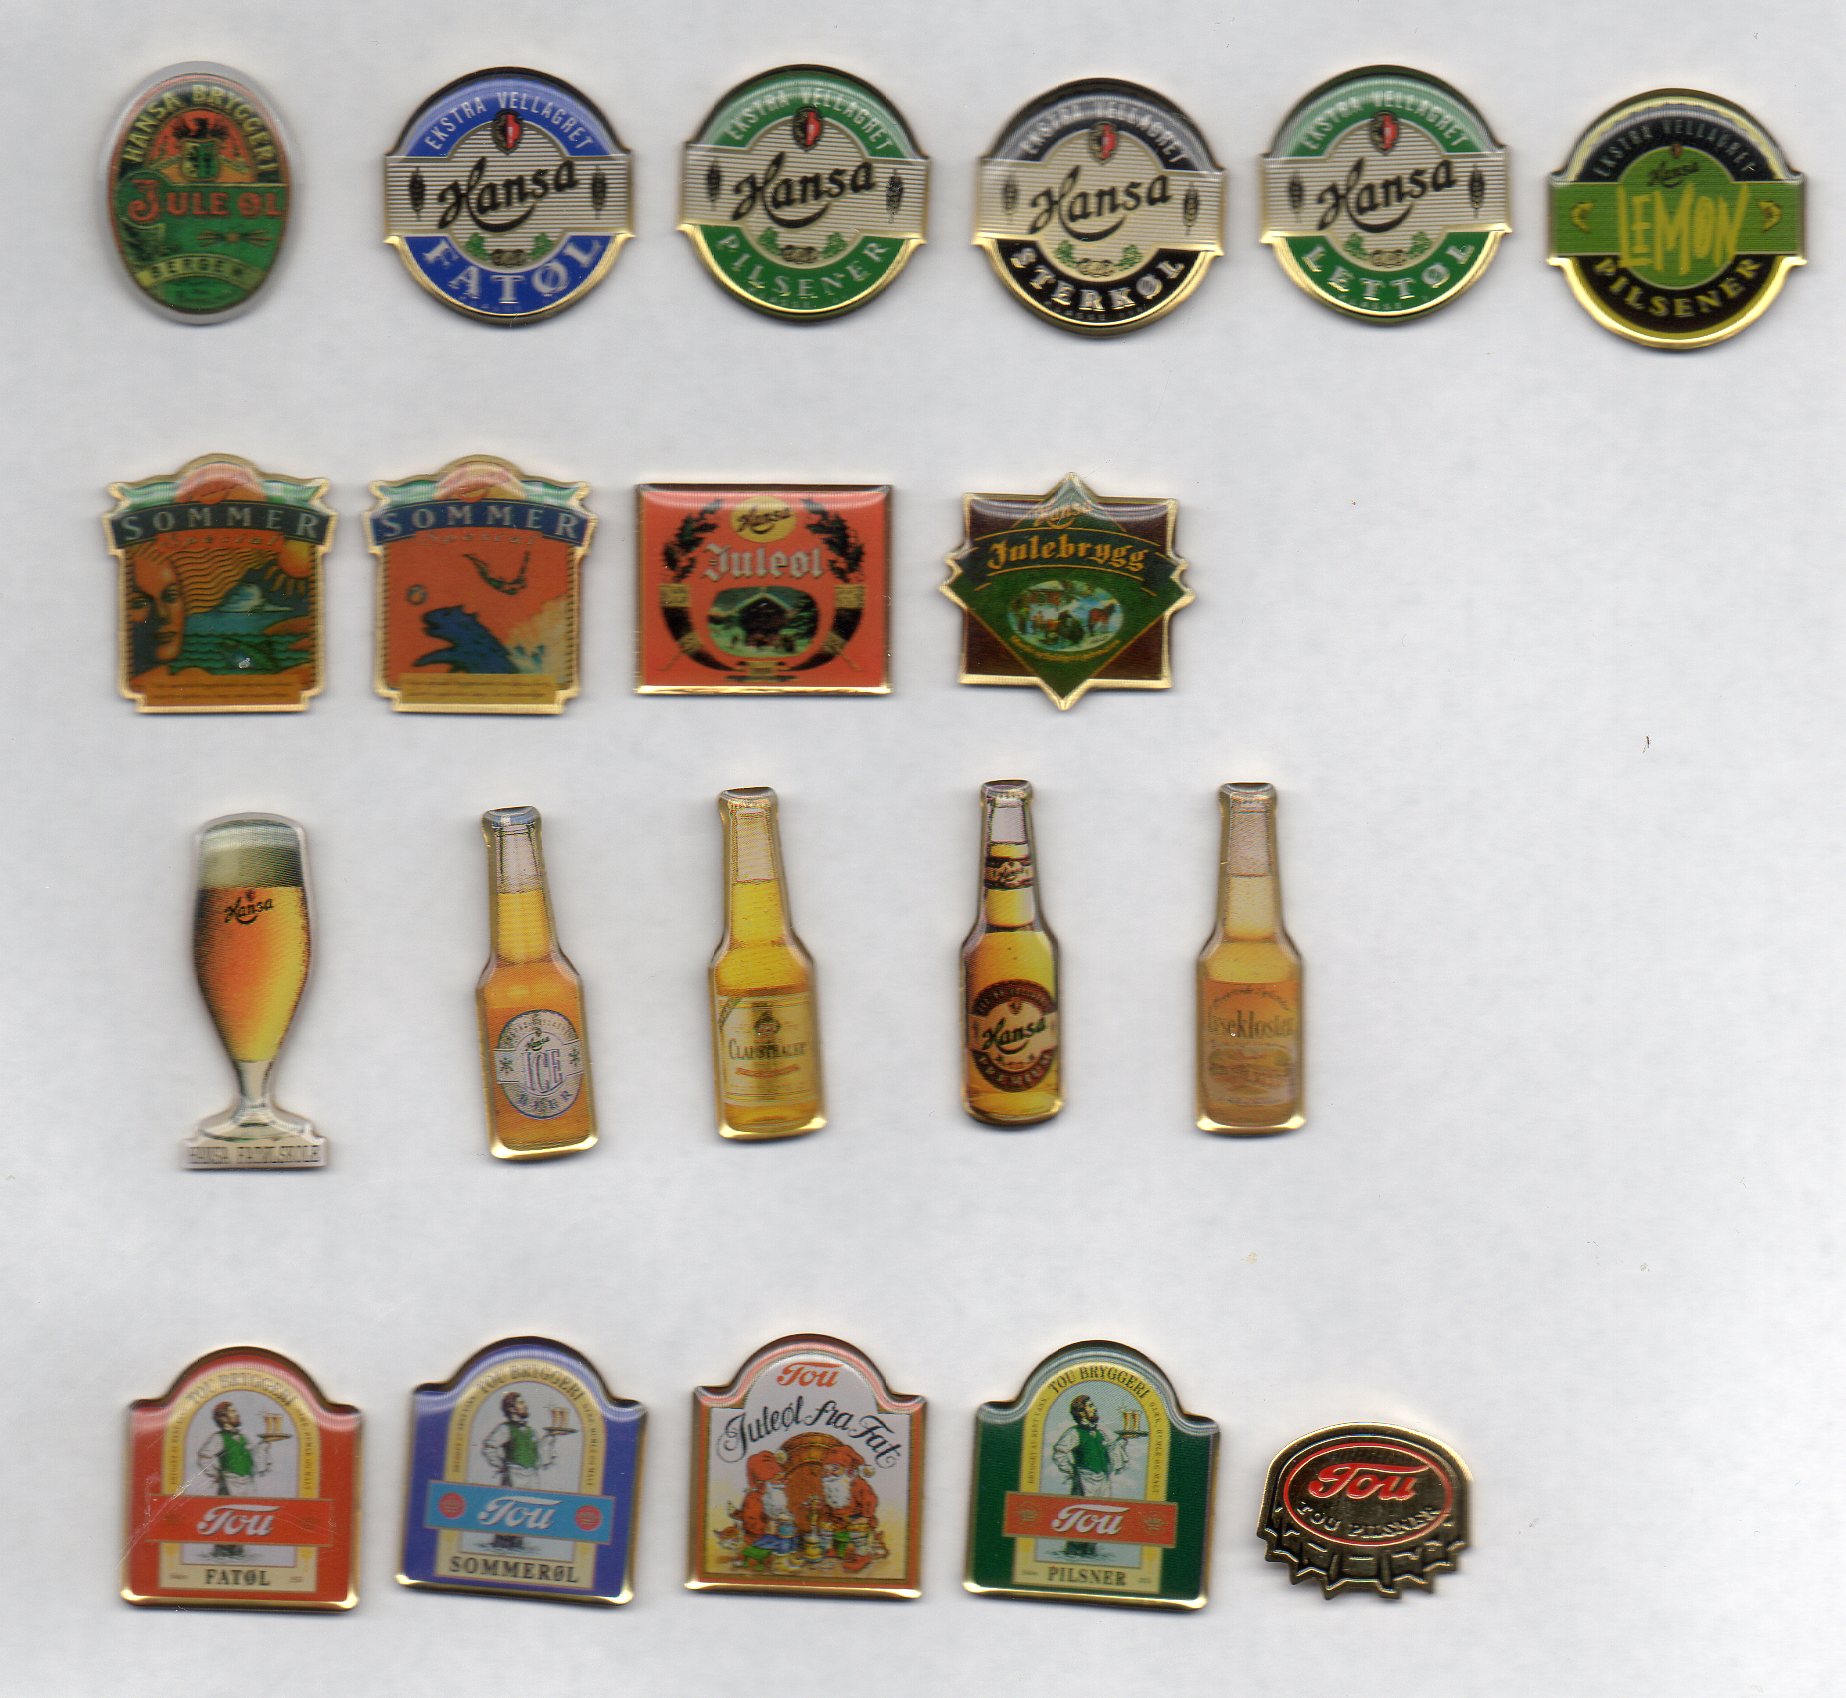 20 different beer pins from Hansa and Tou